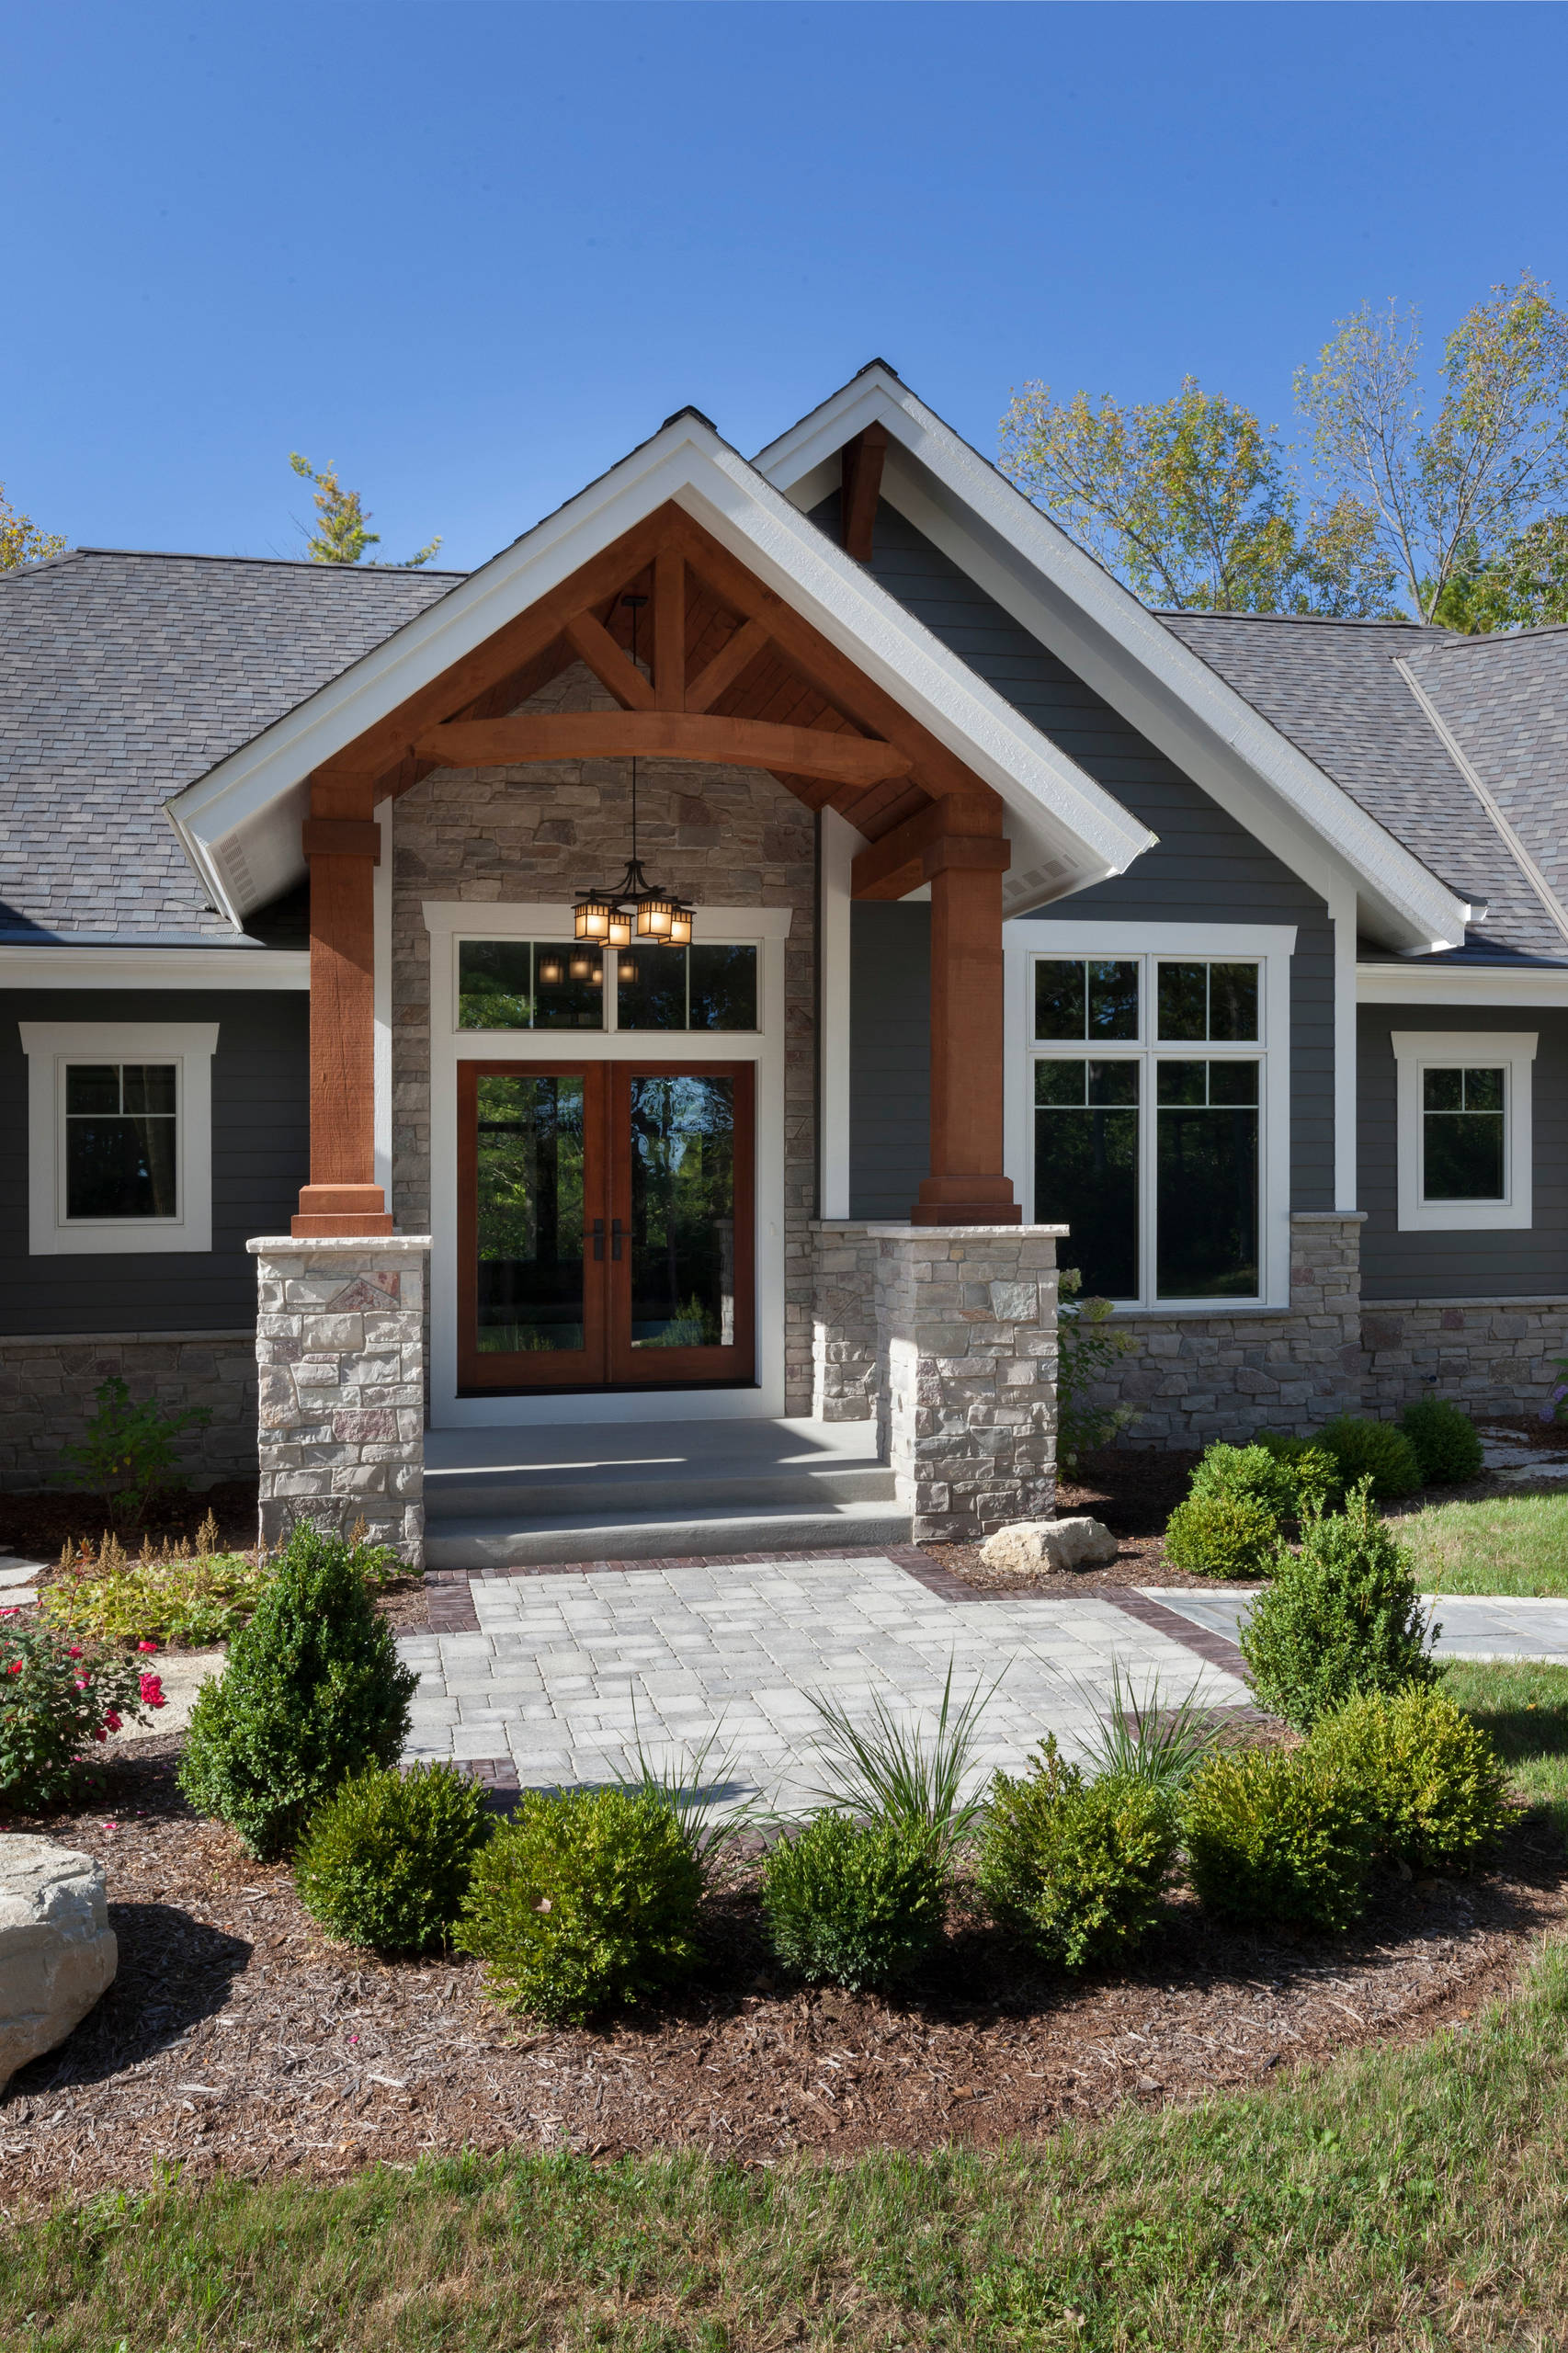 75 Gray Exterior Home Ideas You'Ll Love - May, 2023 | Houzz